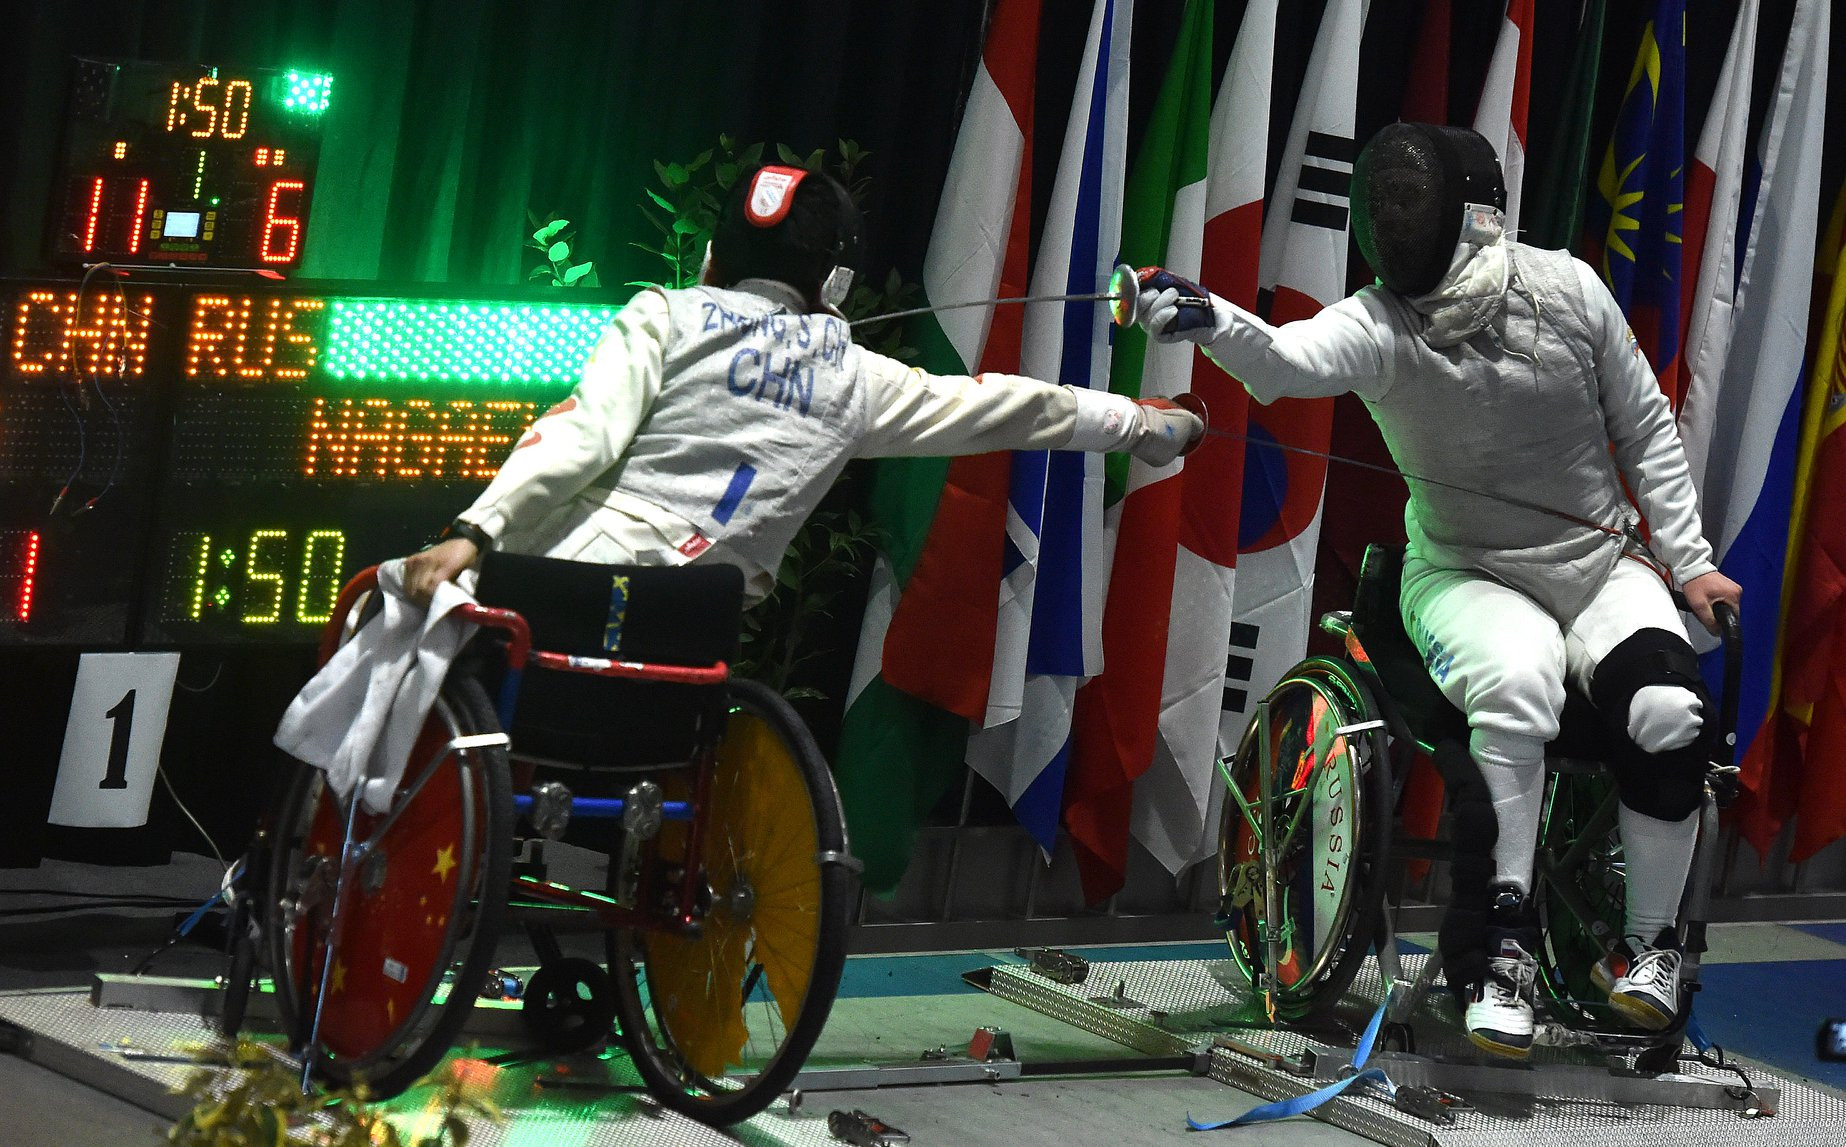 More than 200 competitors will take part in the IWAS Wheelchair Fencing World Championships starting in South Korea tomorrow ©IWAS